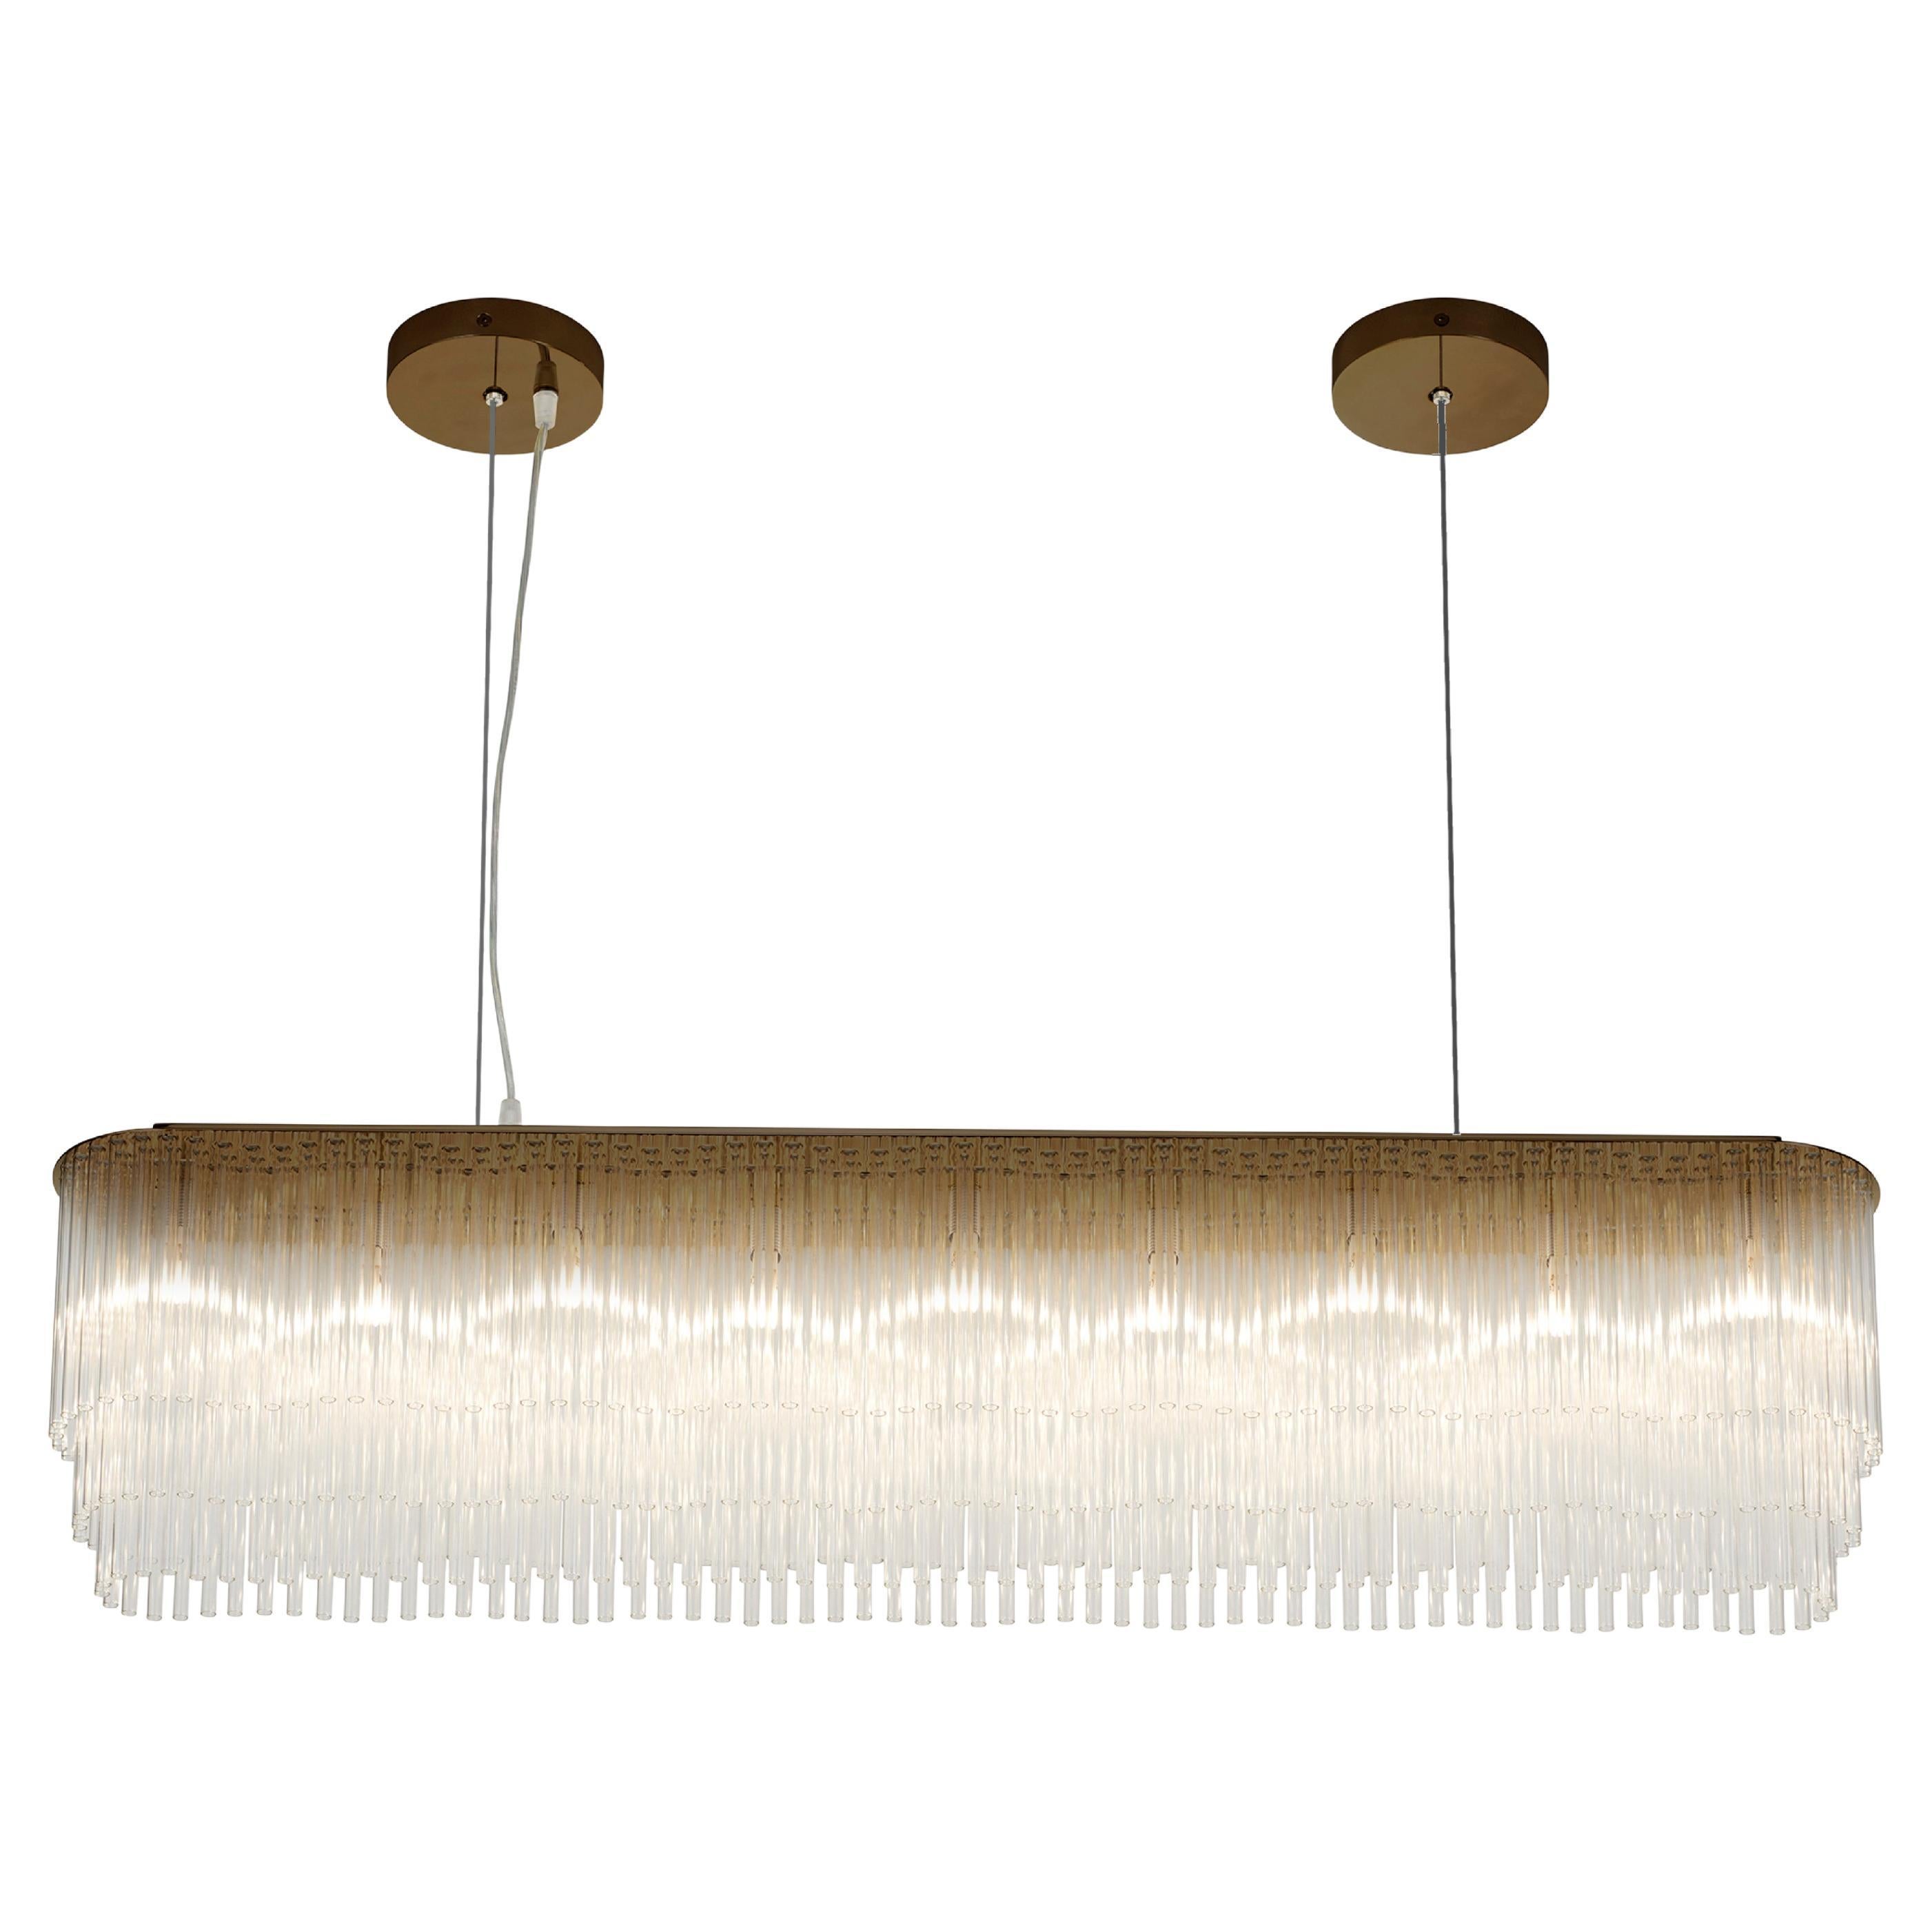 Linear Chandelier Thin 1445mm/58.75" in Brass-based Bronze/Tiered Glass Profile For Sale